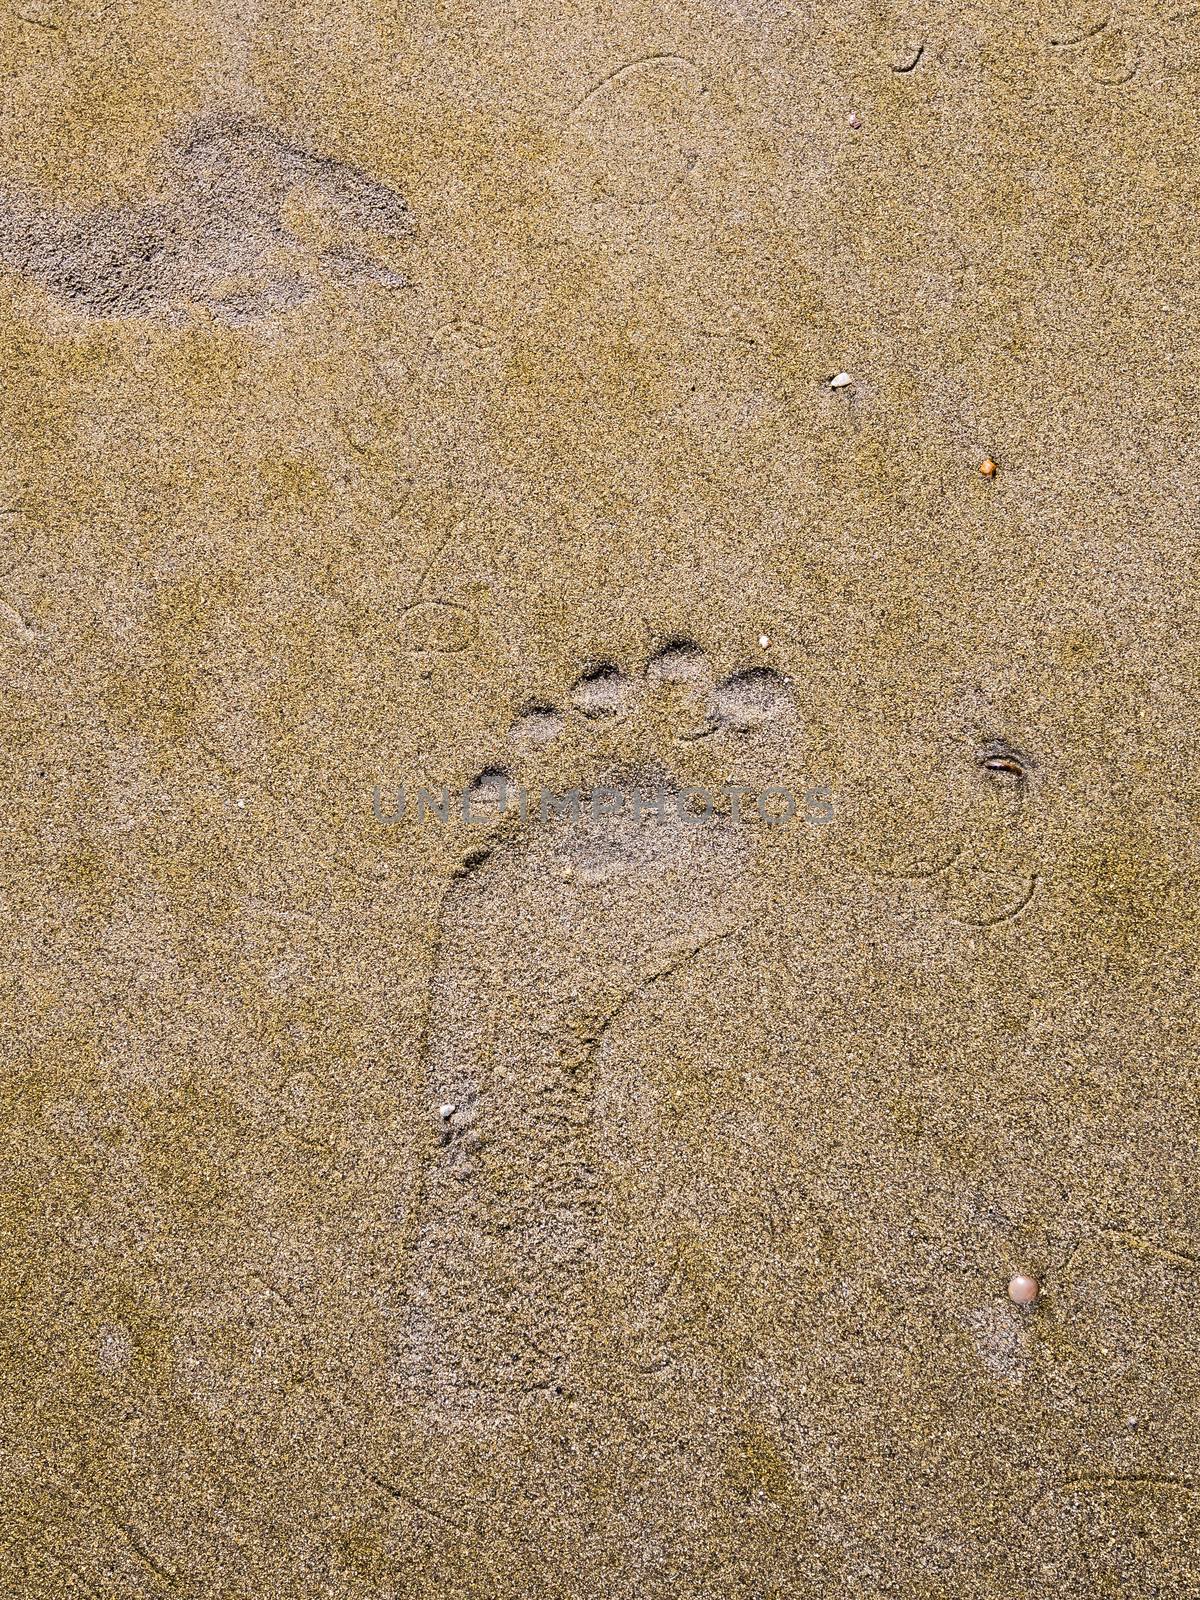 Footprint in the sand by simpleBE